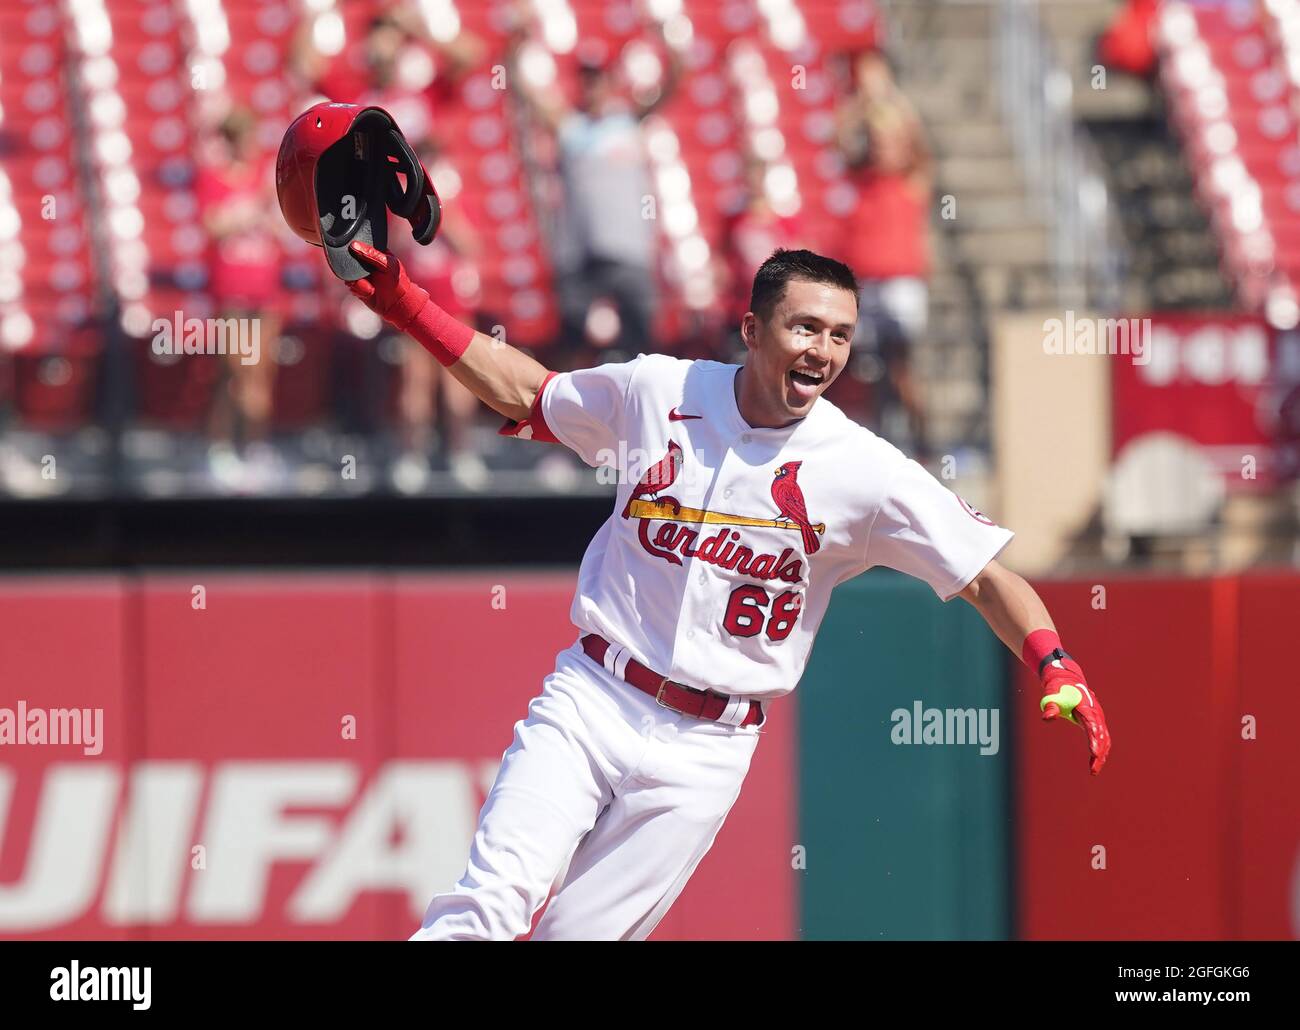 St. Louis, United States. 25th Aug, 2021. St. Louis Cardinals Lars Nootbaar  celebrates after hitting a game winning single with bases loaded in the  tenth inning against the Detroit Tigers at Busch